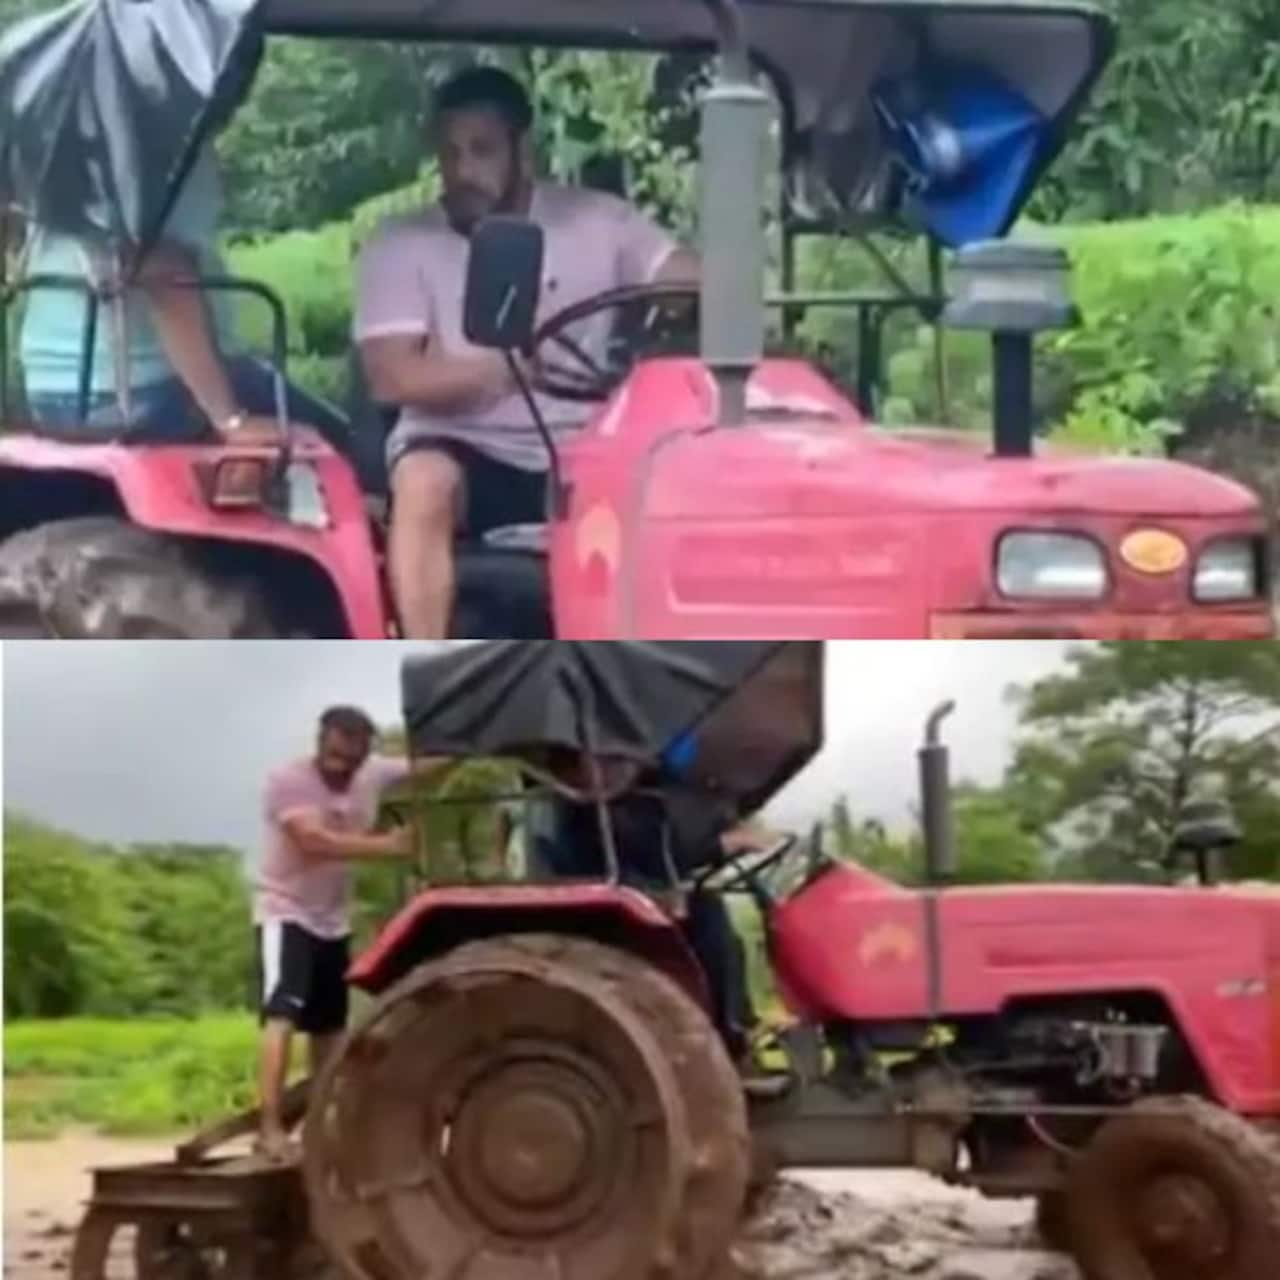 Salman Khan unfazed by backlash over his mud-soaked pic, shares a video of farming in Panvel with tractor